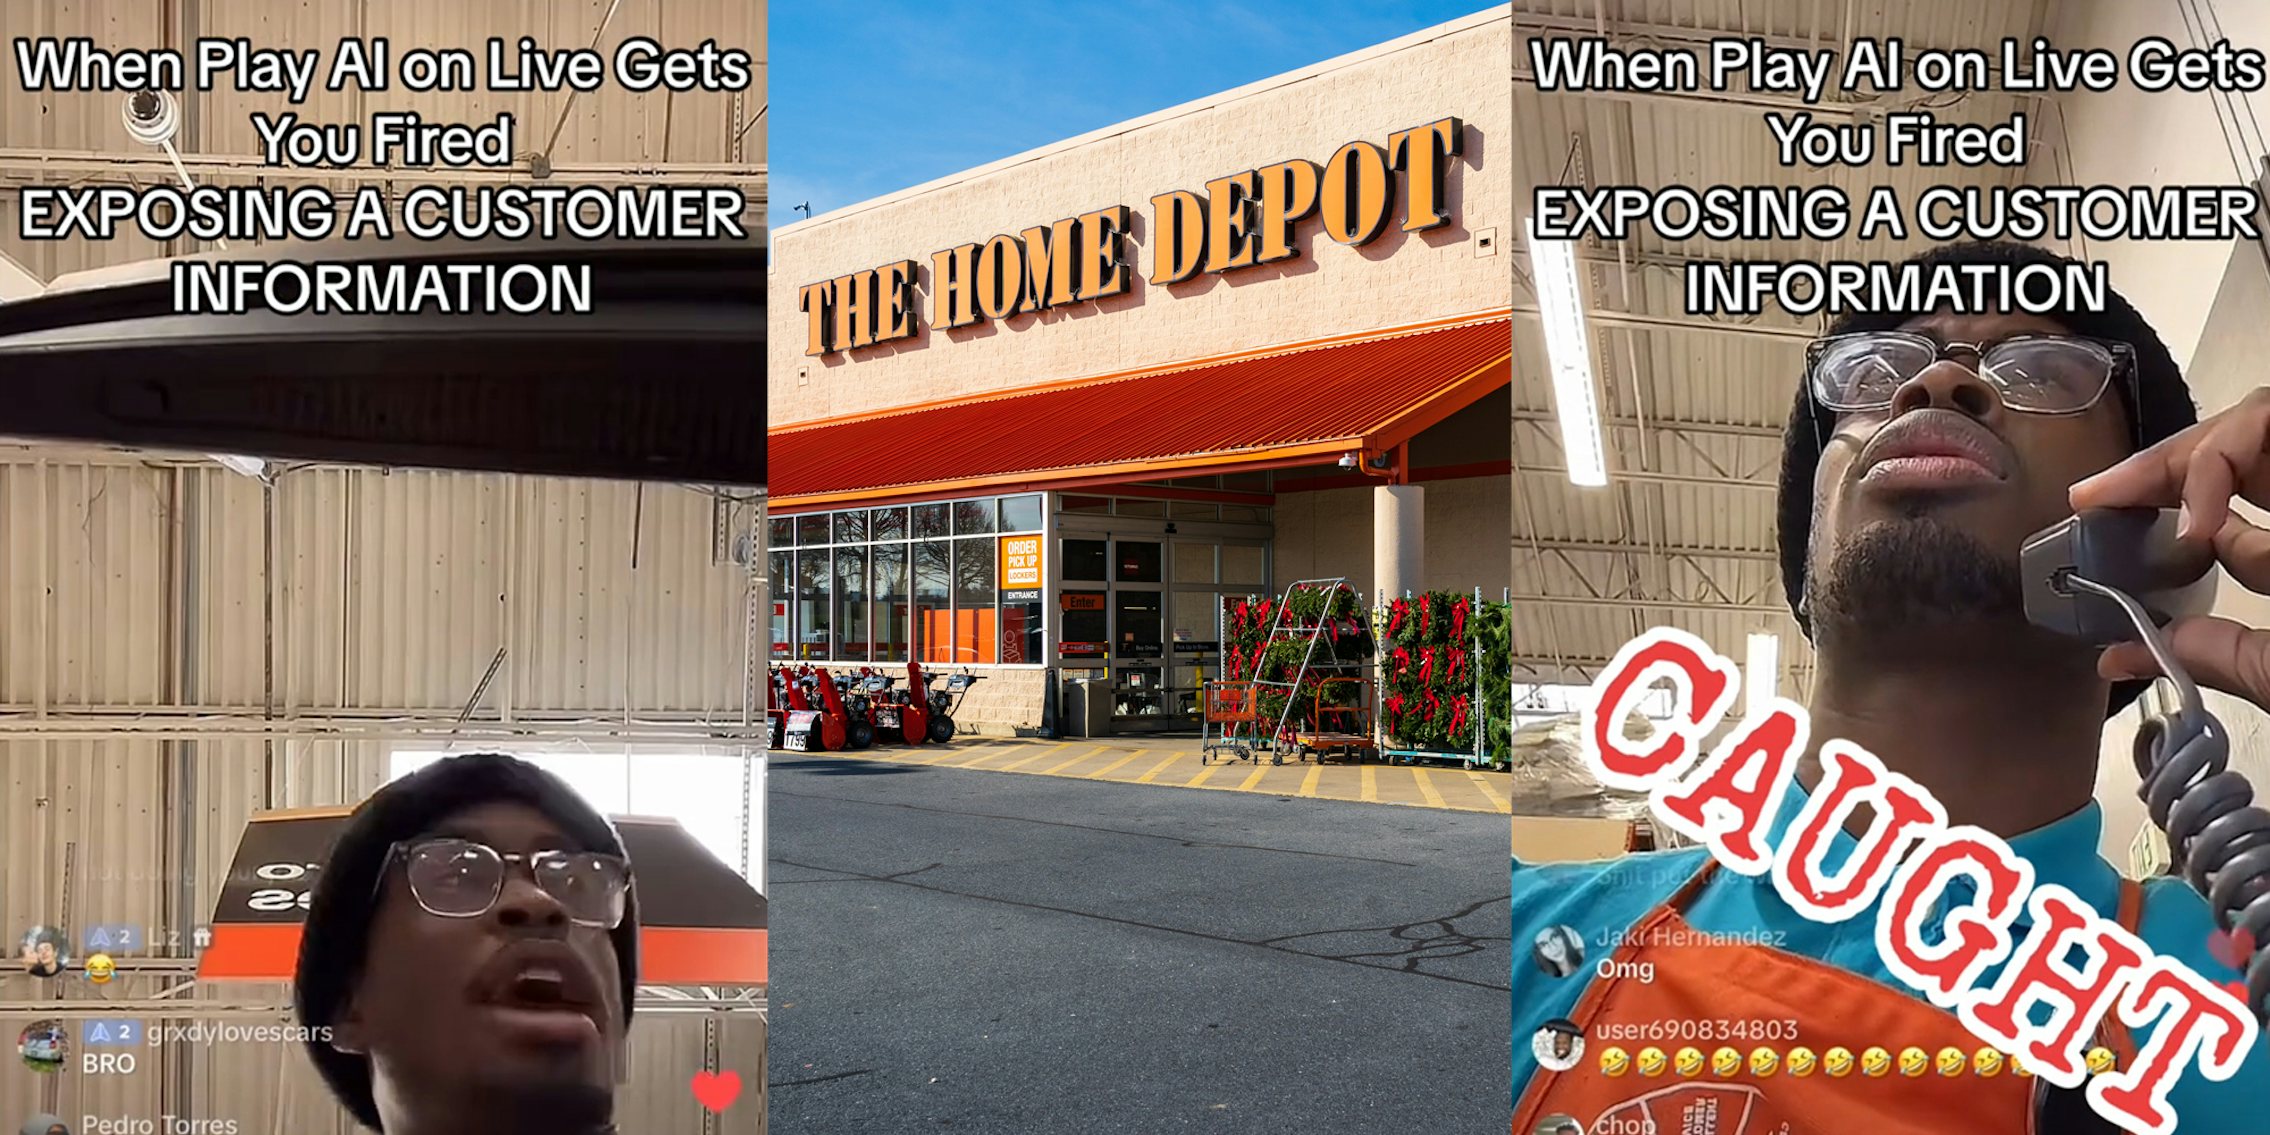 Home Depot worker on Instagram live with caption 'When Play AI on Live Gets You Fired EXPOSING A CUSTOMER INFORMATION' (l) Home Depot building with sign (c) Home Depot worker on Instagram live with caption 'When Play AI on Live Gets You Fired EXPOSING A CUSTOMER INFORMATION' 'CAUGHT' (r)